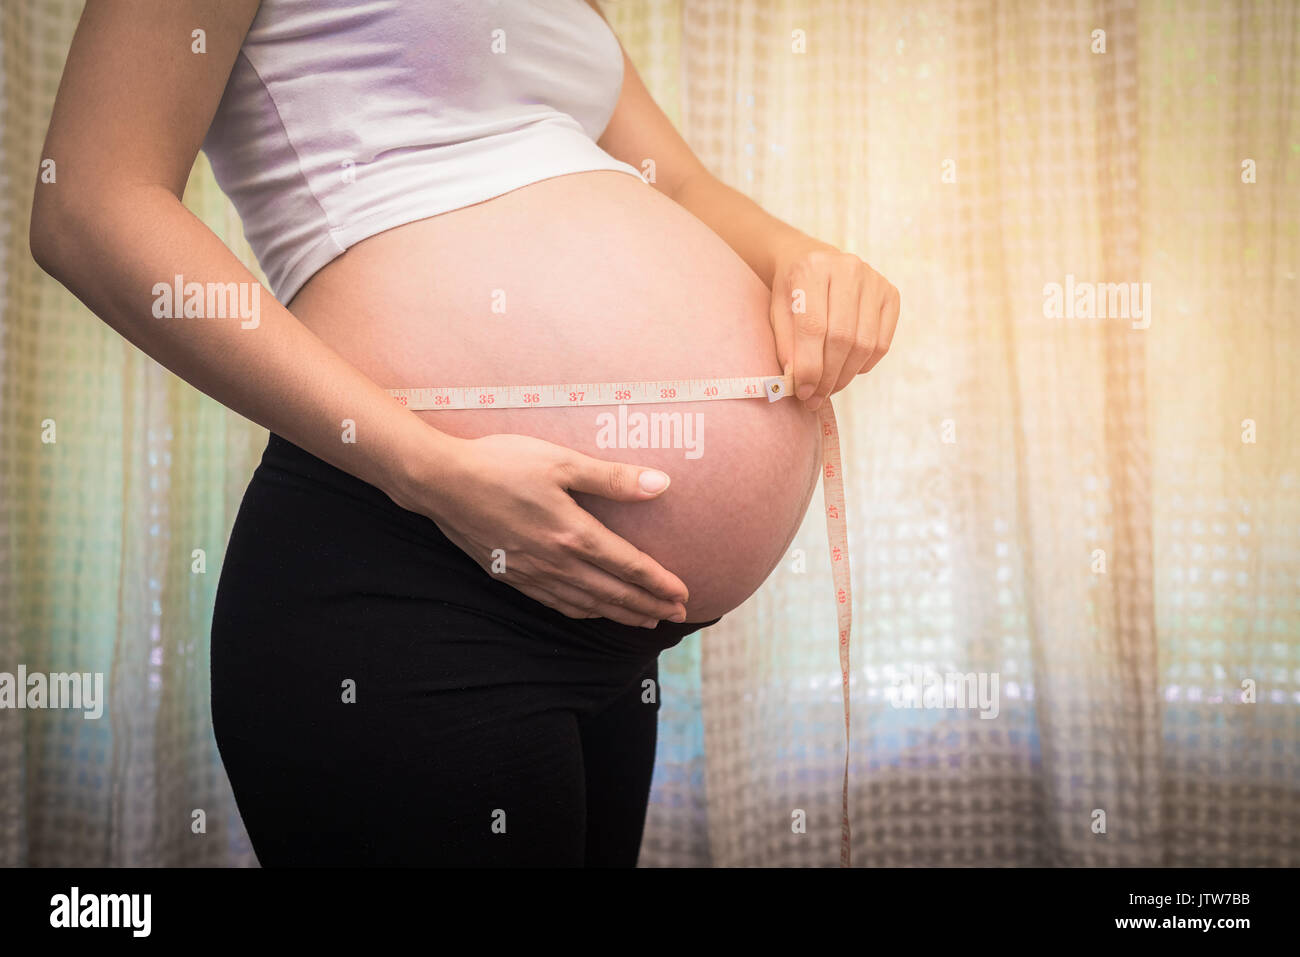 a pregnant woman measure Belly, baby coming soon on the world Stock Photo